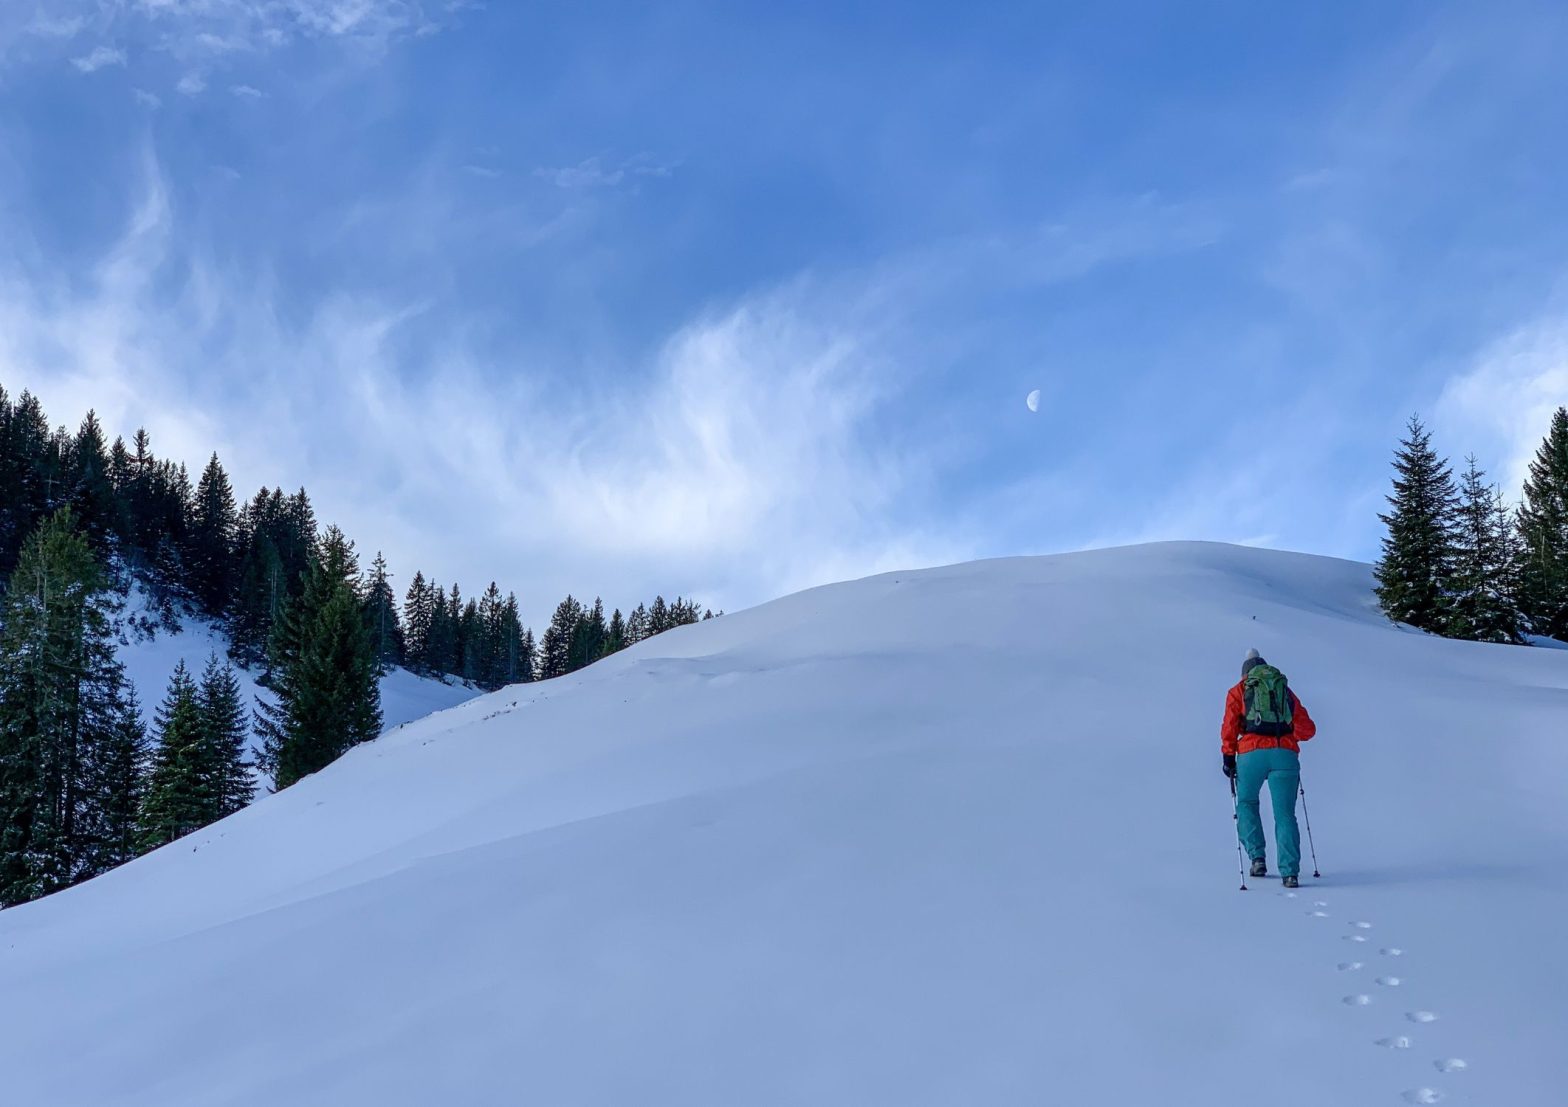 Image shows someone climbing a snowy hill with blue skies and fresh air to benefit their mental health and wellbeing